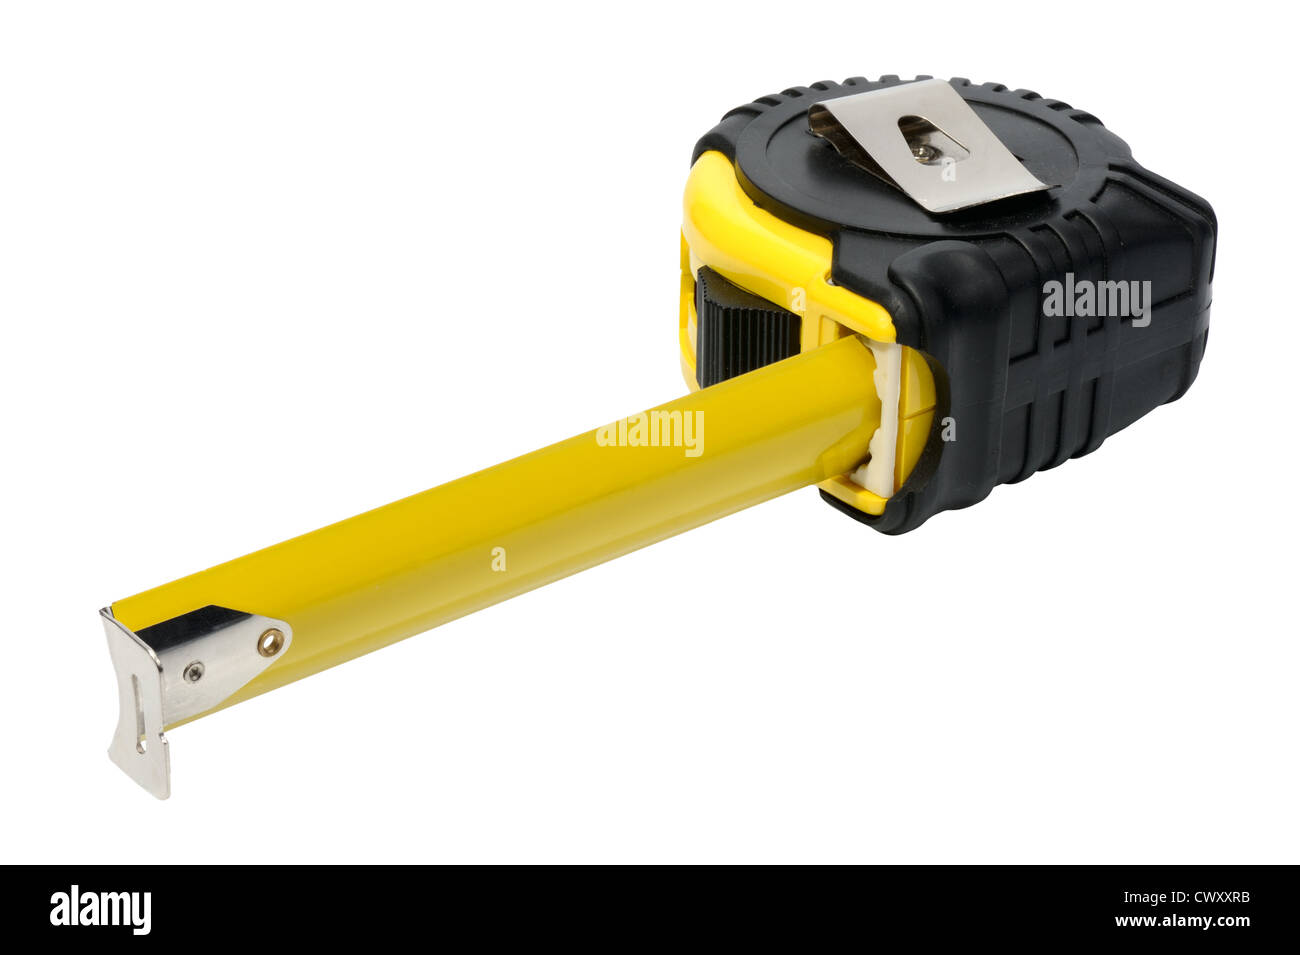 Black and yellow yardstick on a white background, isolated Stock Photo